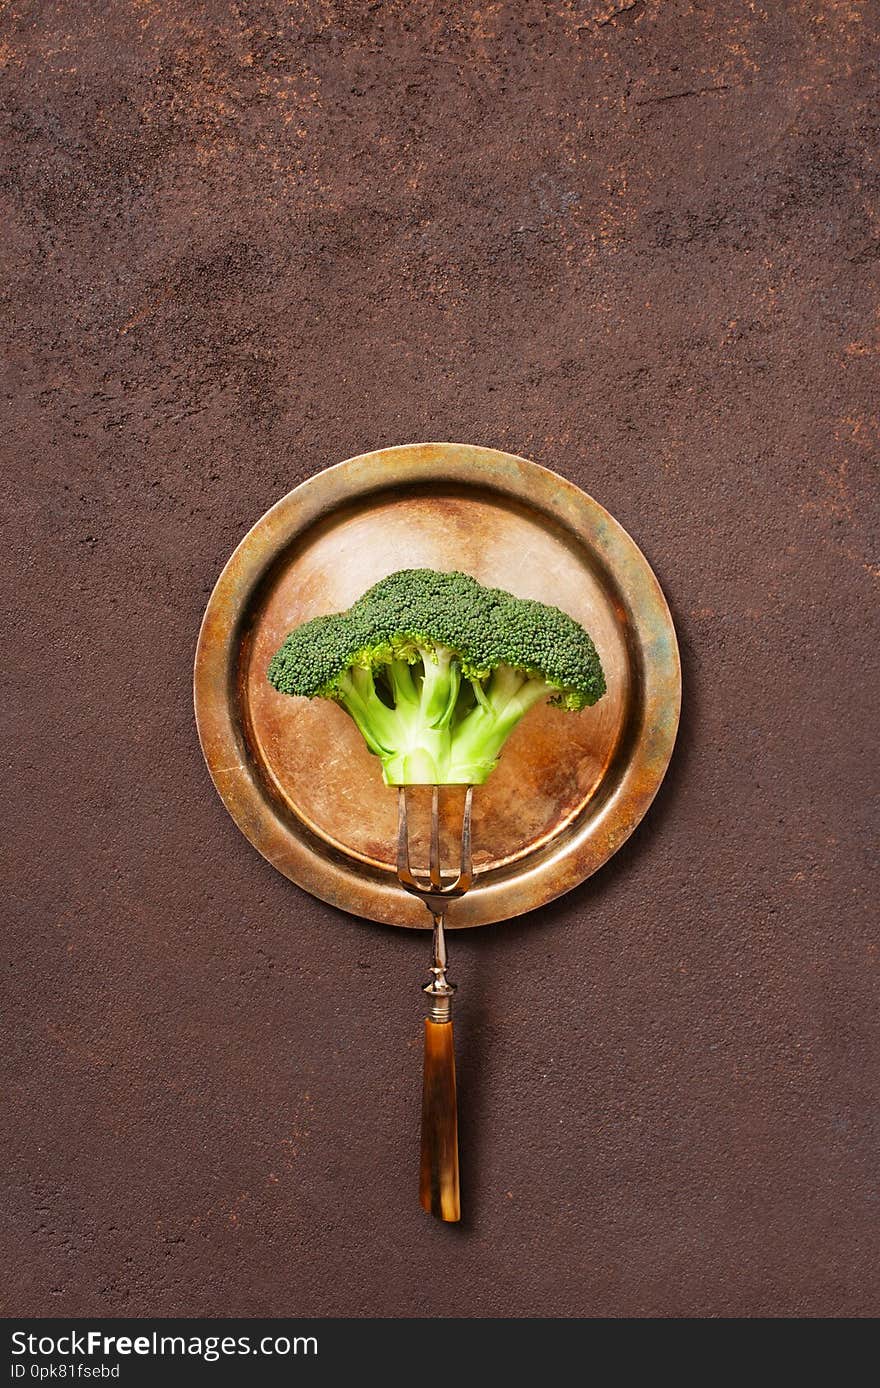 Broccoli on the vintage metal plate on the brown textured table, concept of healthy eating, top view